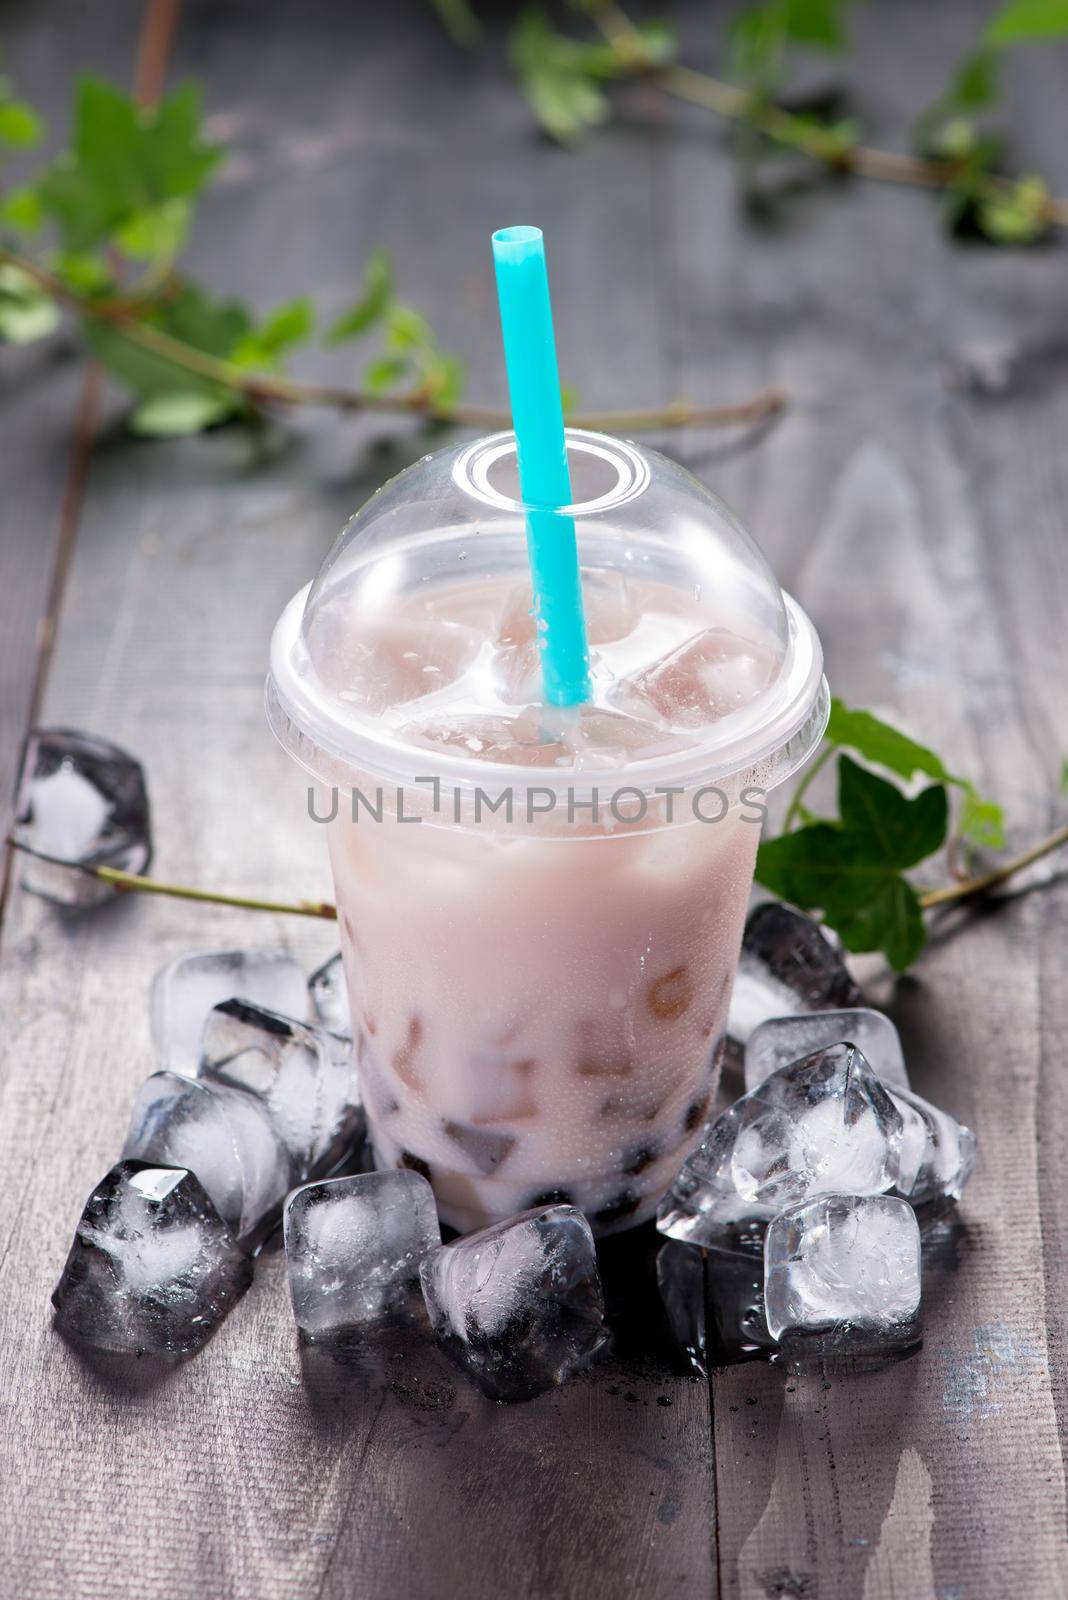 Taro bubble tea and black tapioca pearls on crushed ice by makidotvn